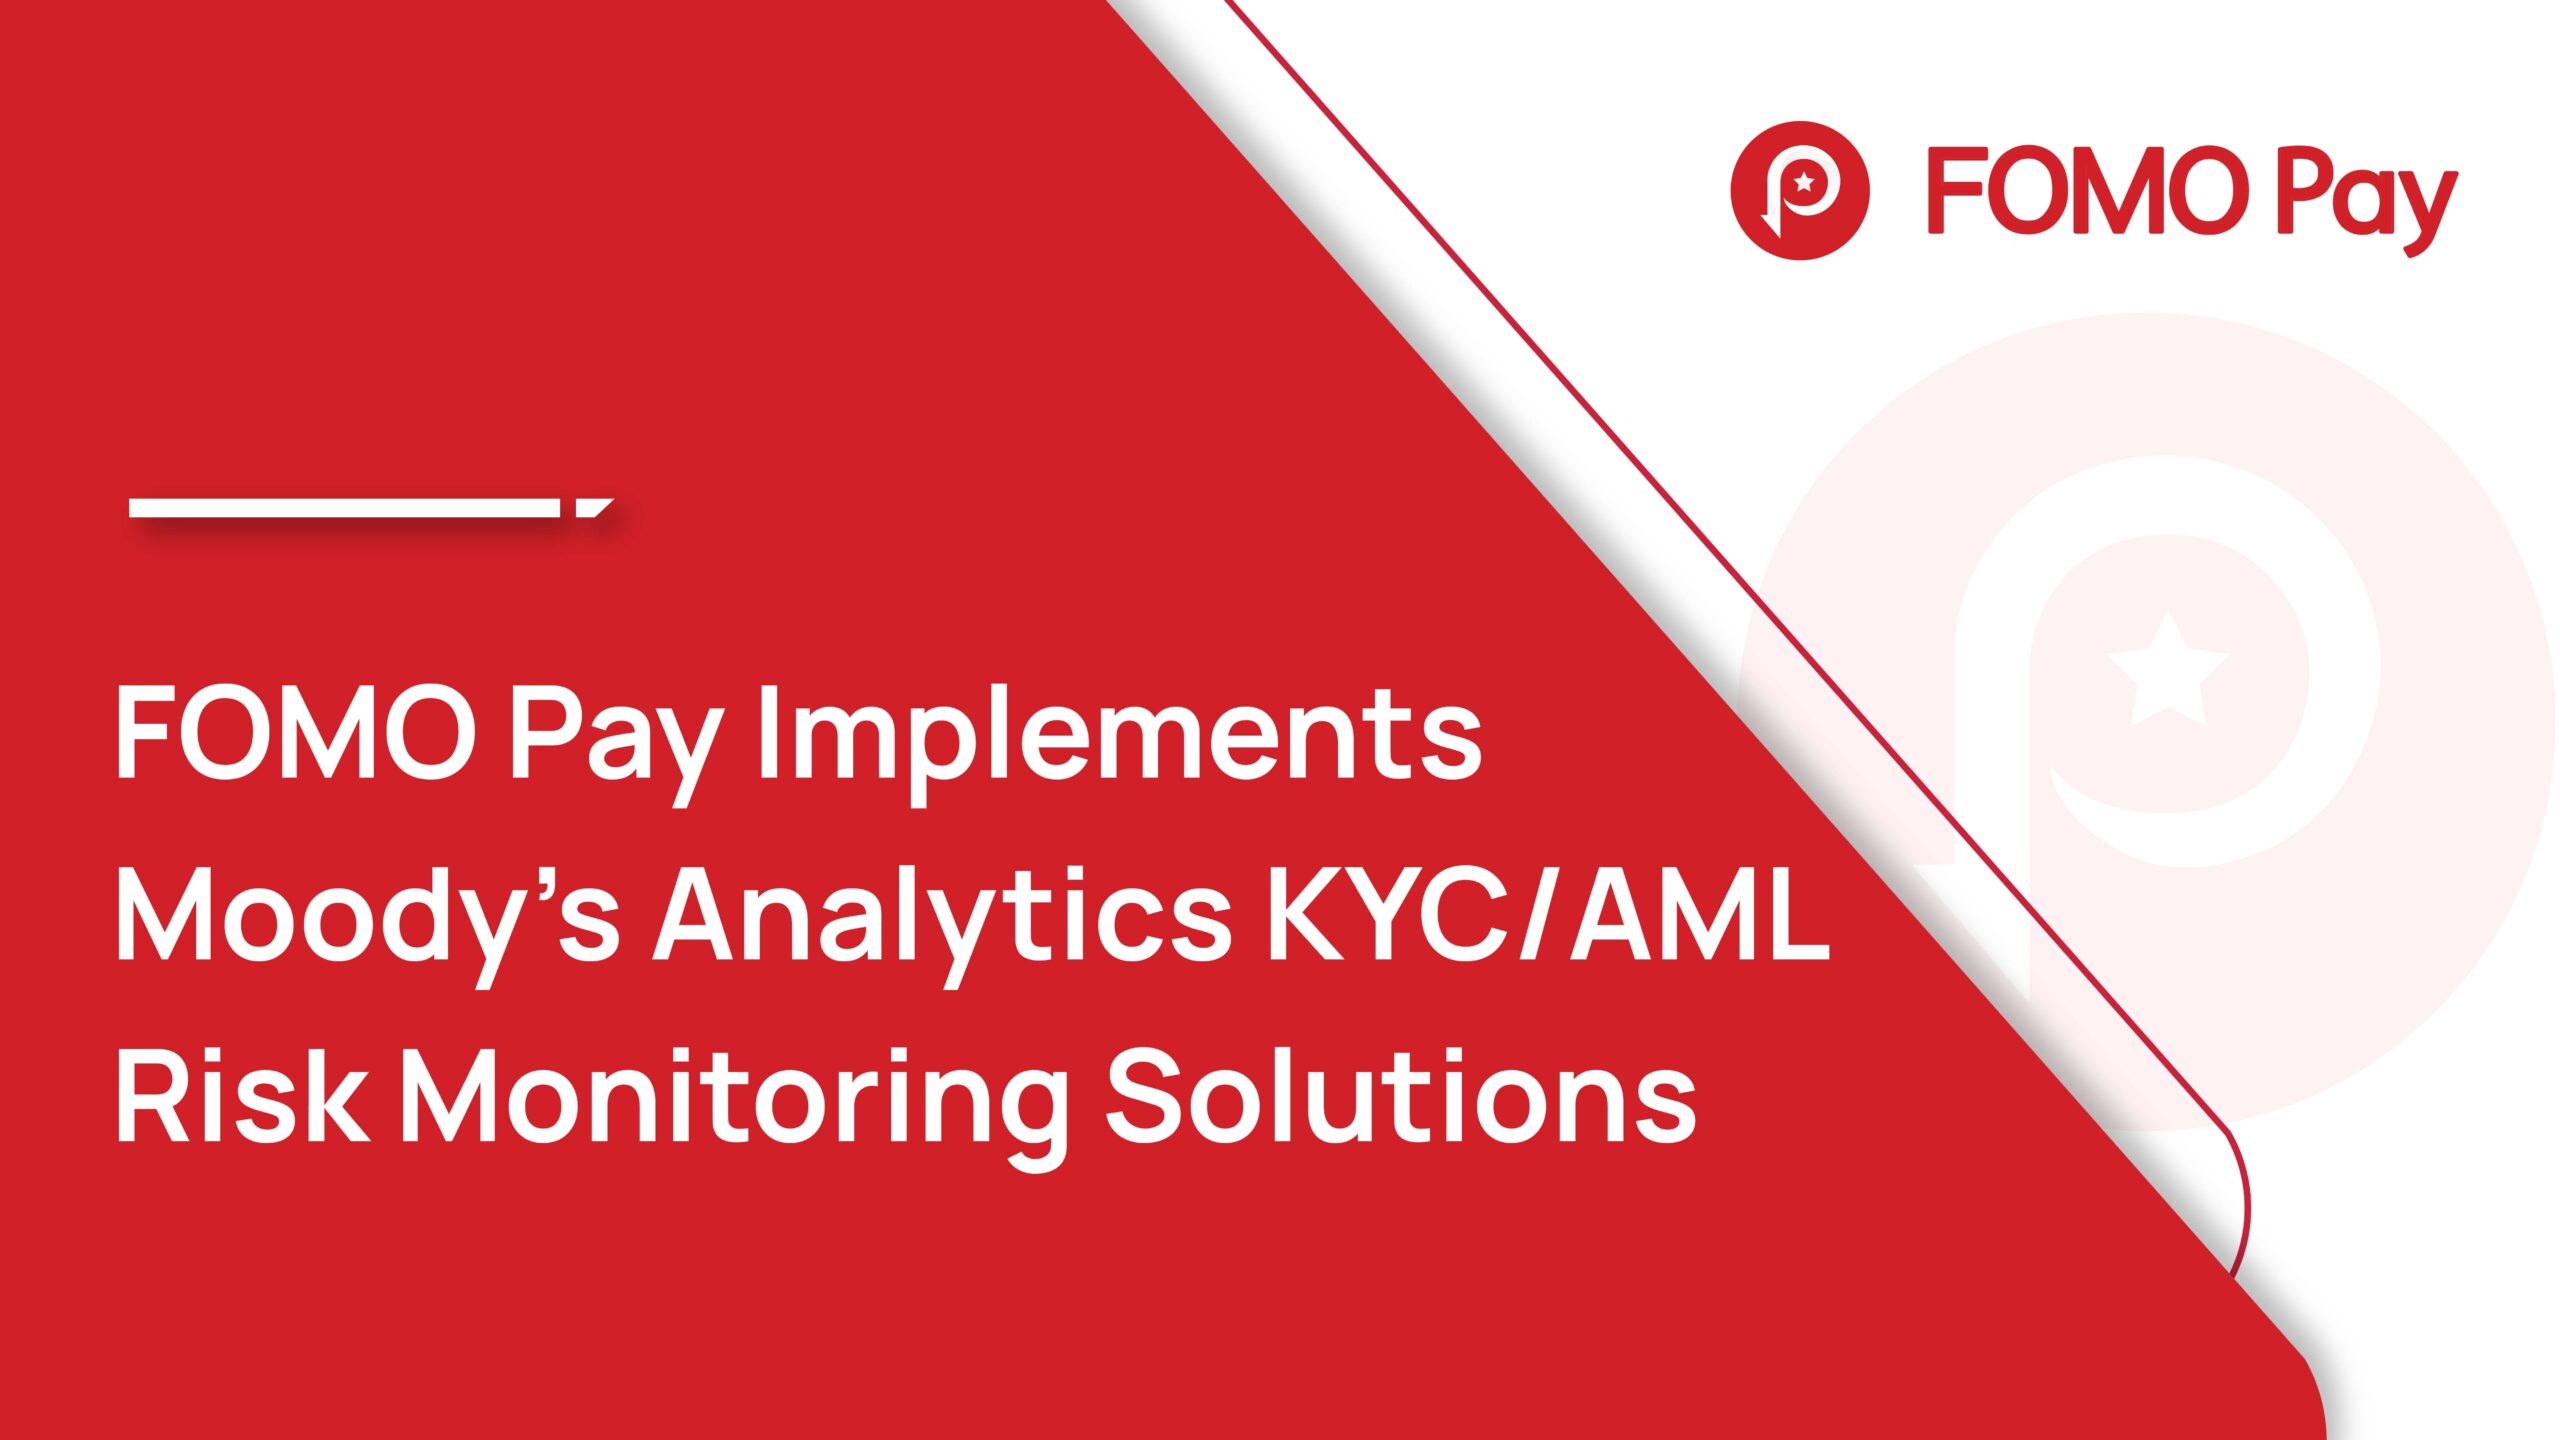 FOMO Pay Implements Moody’s Analytics End-to-End KYC/AML Risk Monitoring Solutions for its Secure Digital Payment and Digital Banking Services